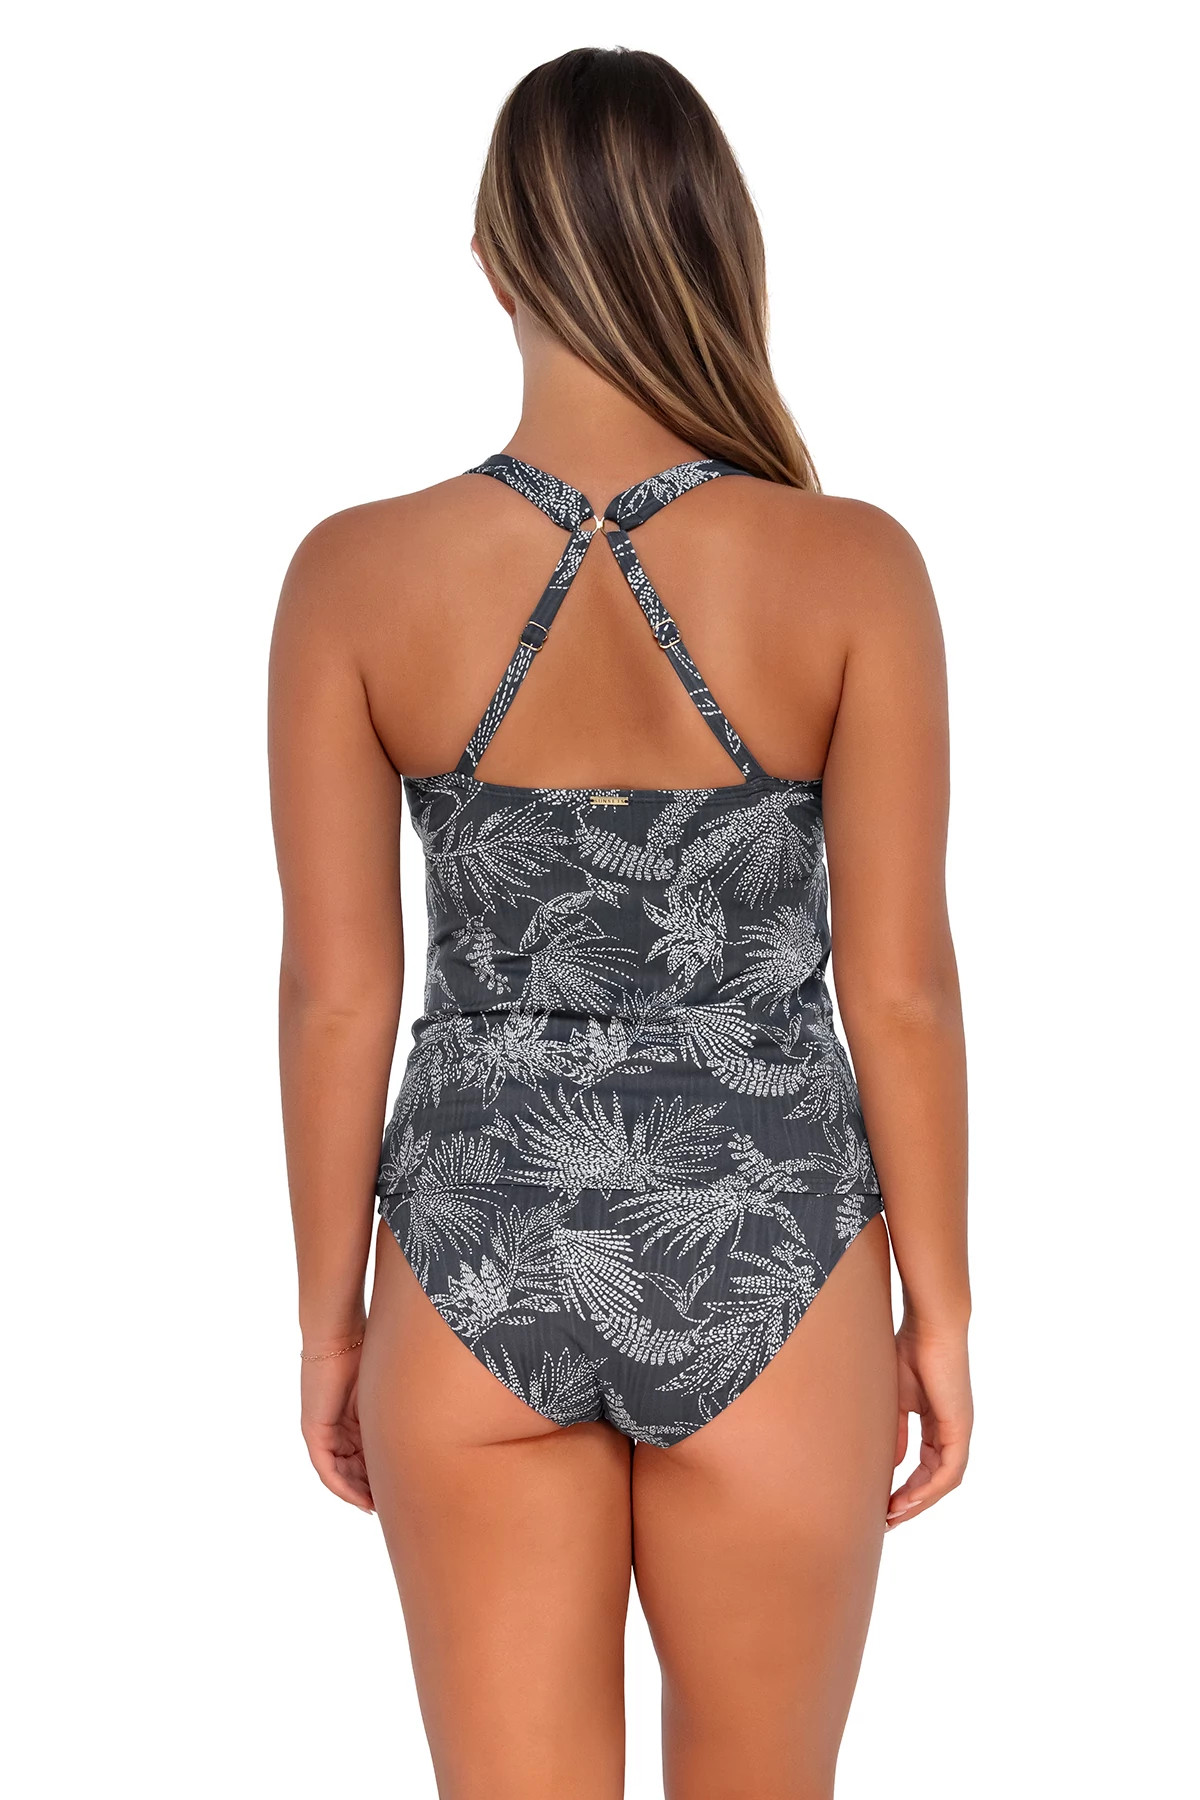 FANFARE SEAGRASS TEXTURE Elsie Underwire Tankini Top (E-H Cup) image number 3